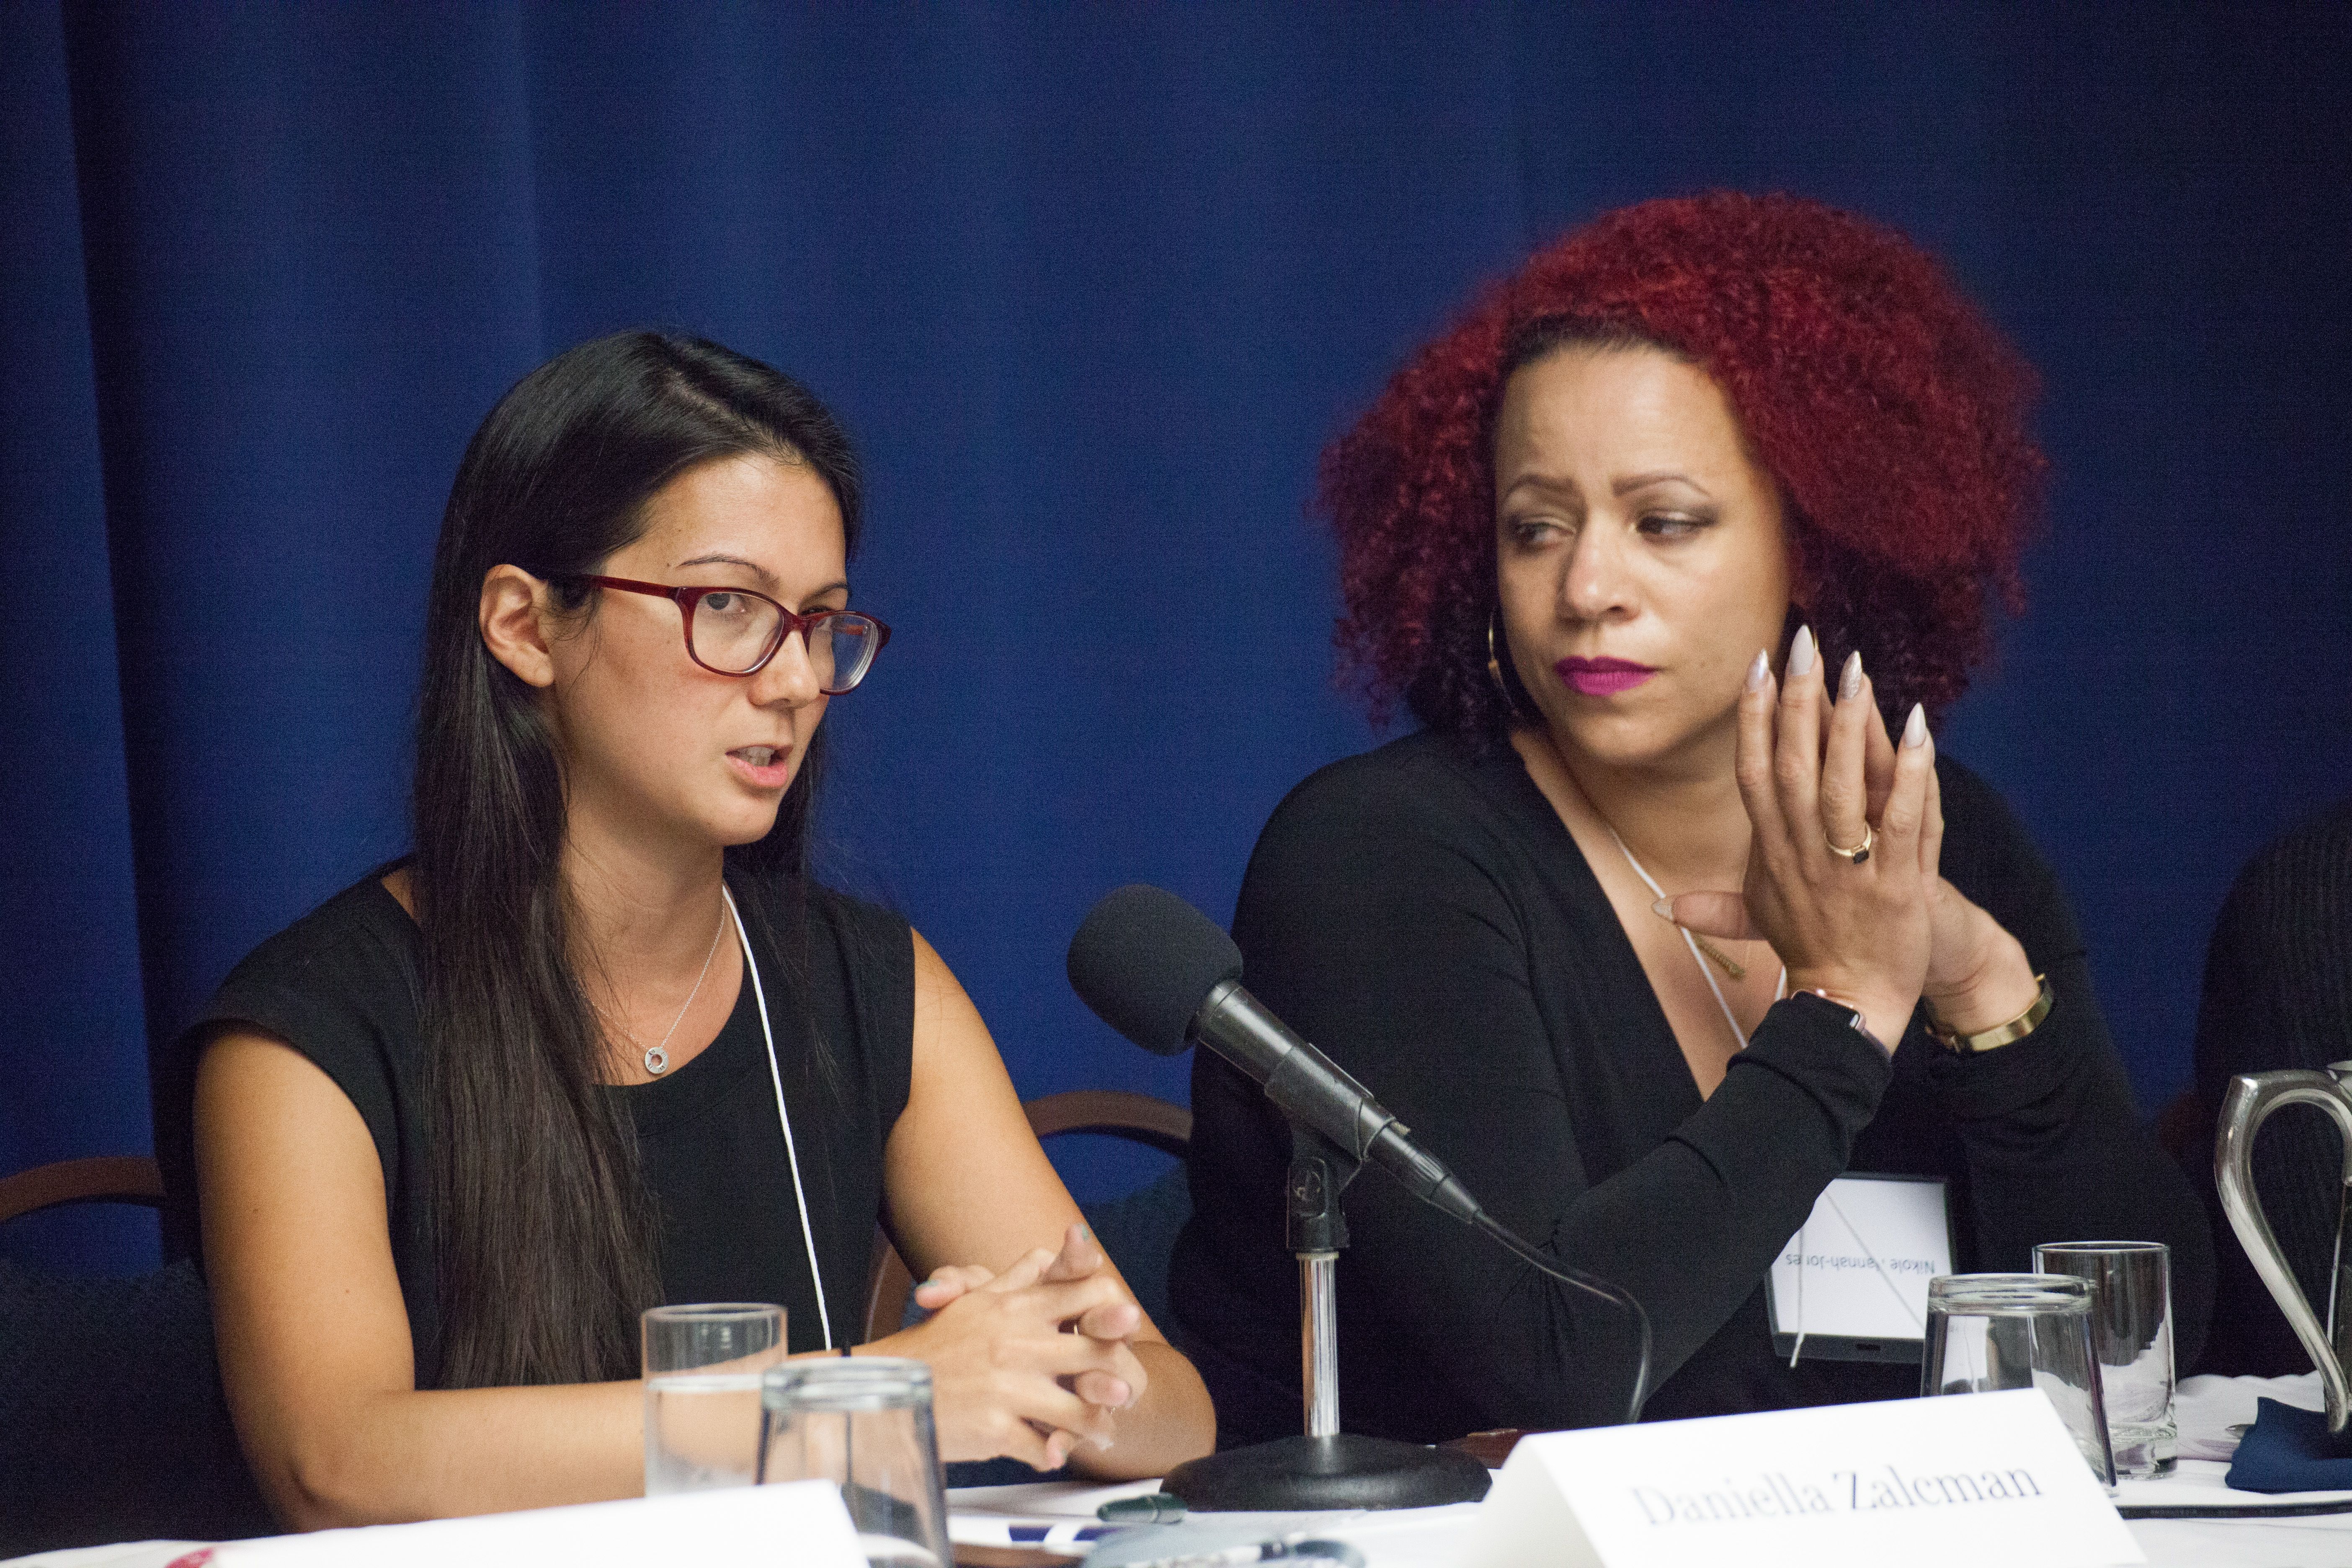 Grantee Daniella Zalcman (left) discusses journalism in terms of race, gender, and colonialism. Image by Sydney Combs. United States, 2017.